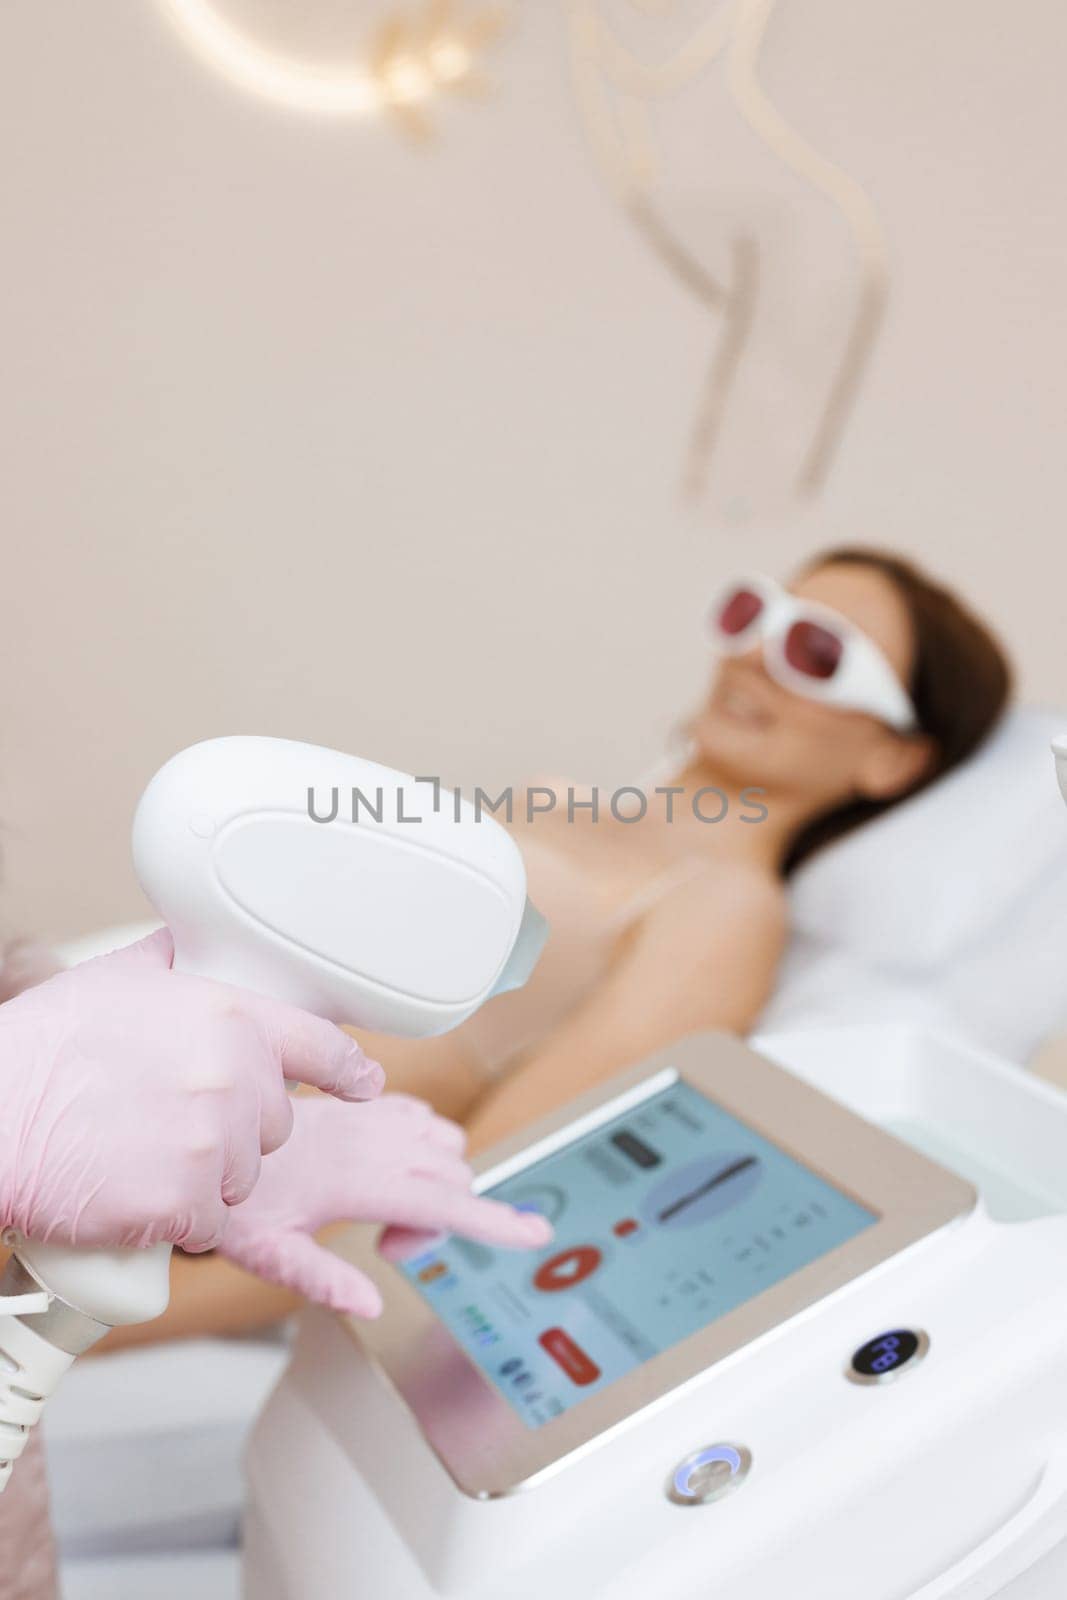 Close up of female beautician in sterile gloves using diode laser hair removal machine while smiling woman laying on daybed. Esthetician preparing equipment for epilation procedure.